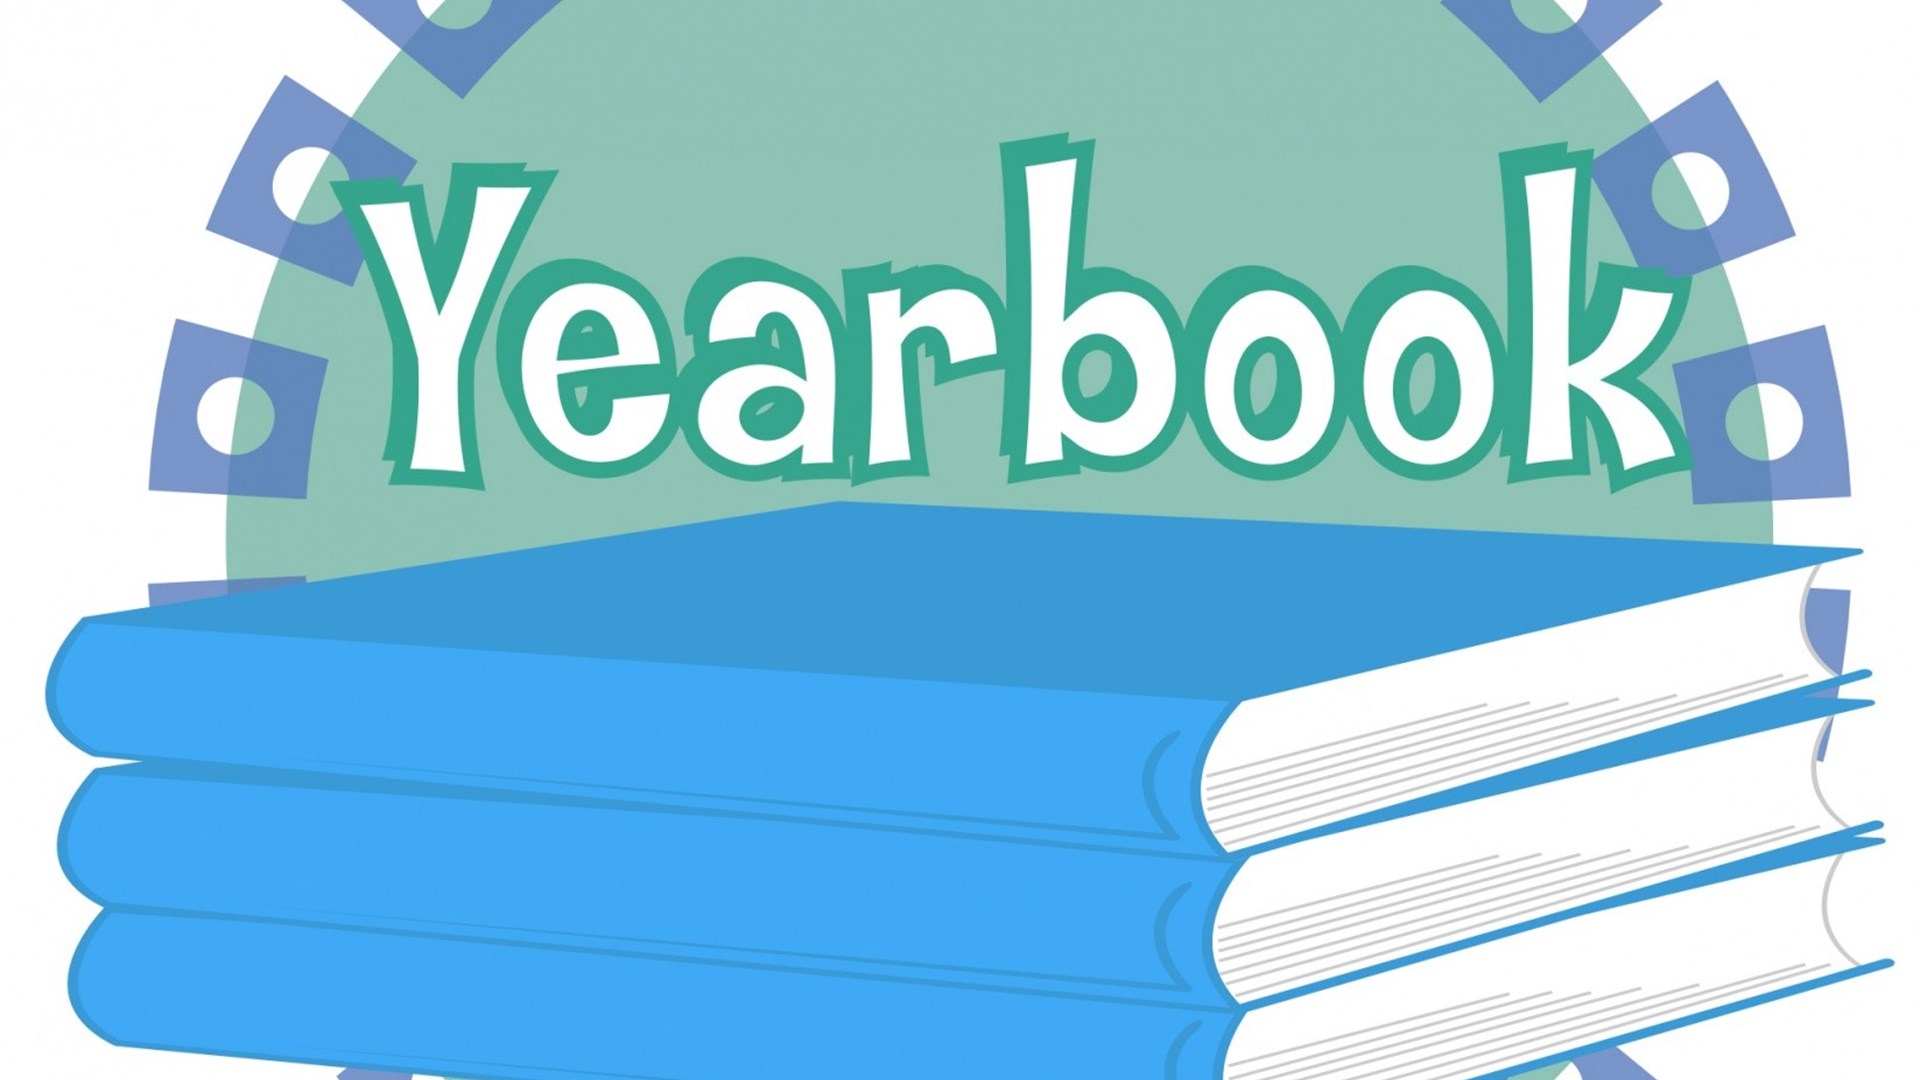 Make Sure to Purchase a Yearbook!!!